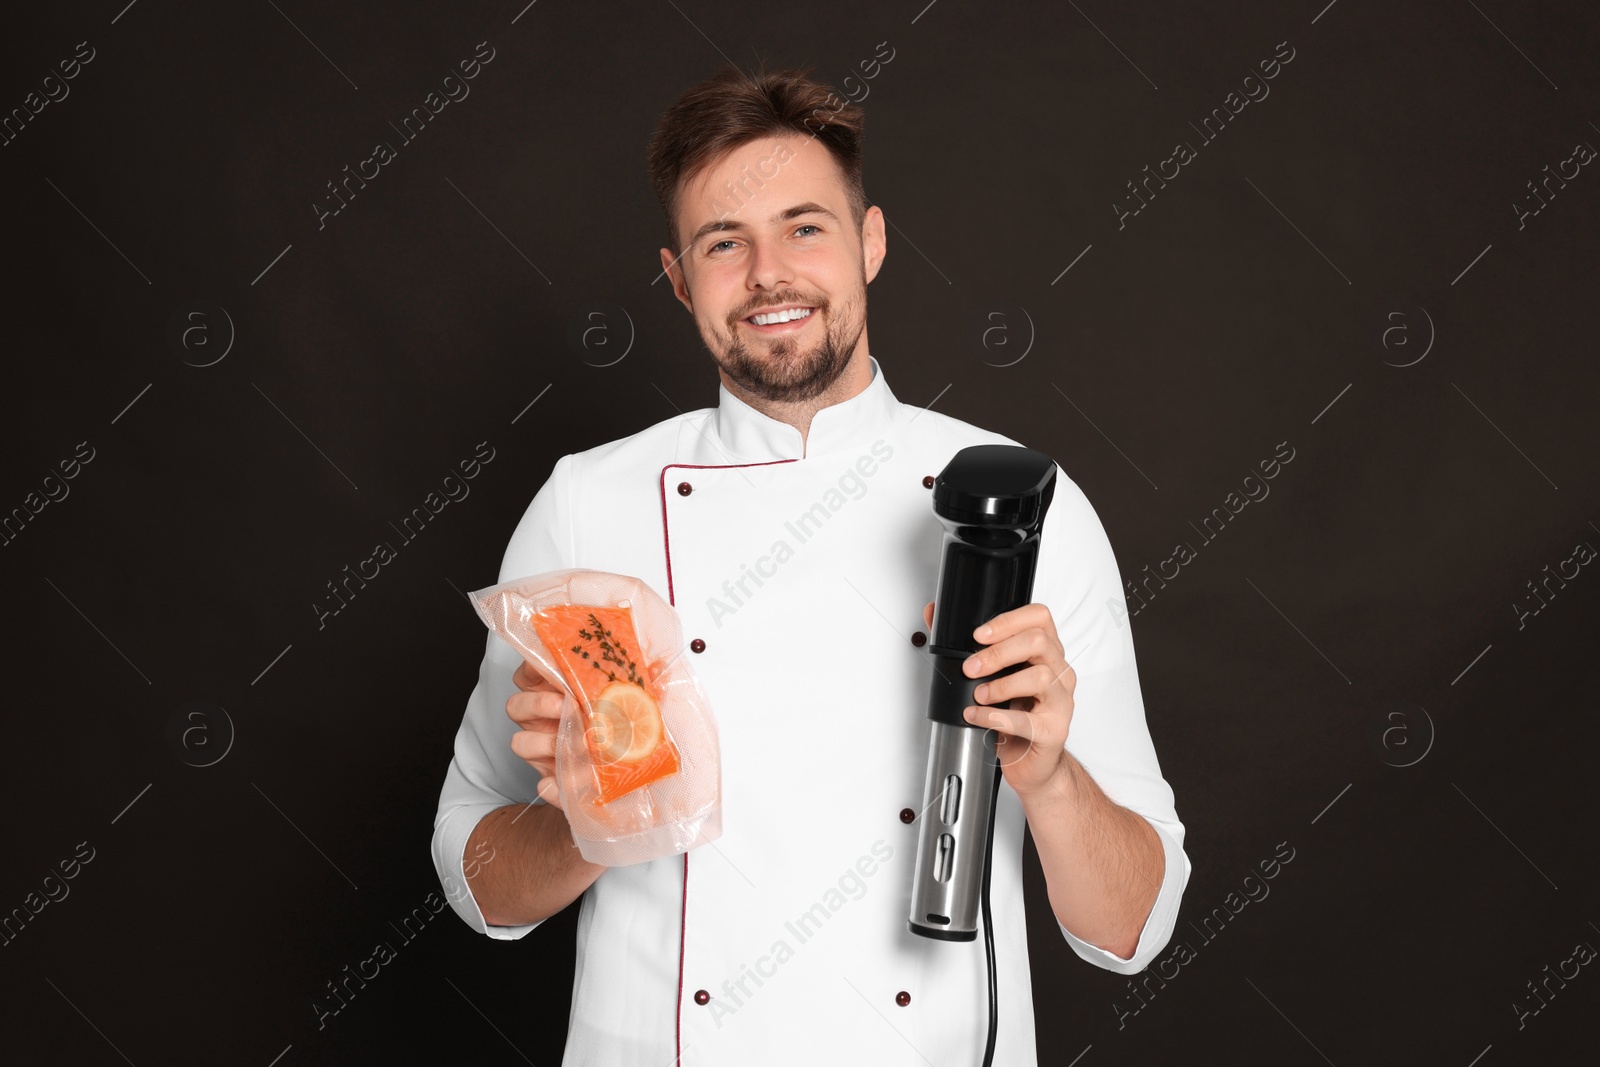 Photo of Smiling chef holding sous vide cooker and salmon in vacuum pack on black background